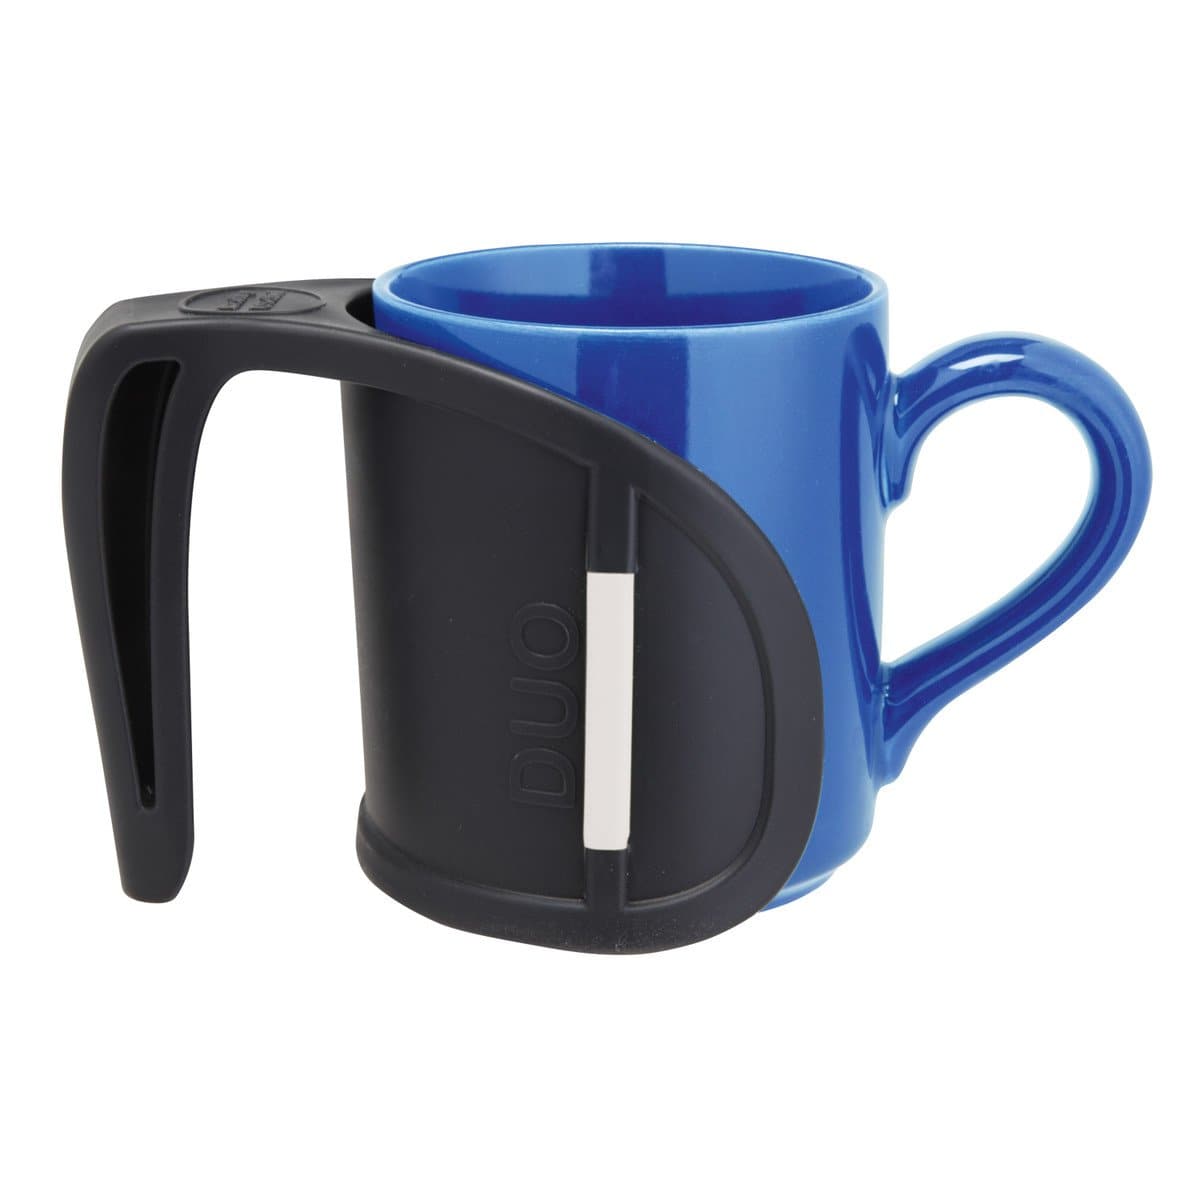 HealthSmart Duo Beverage Grip Handle for Mugs - Protects Hands from Hot Surfaces - Senior.com Beverage Holder